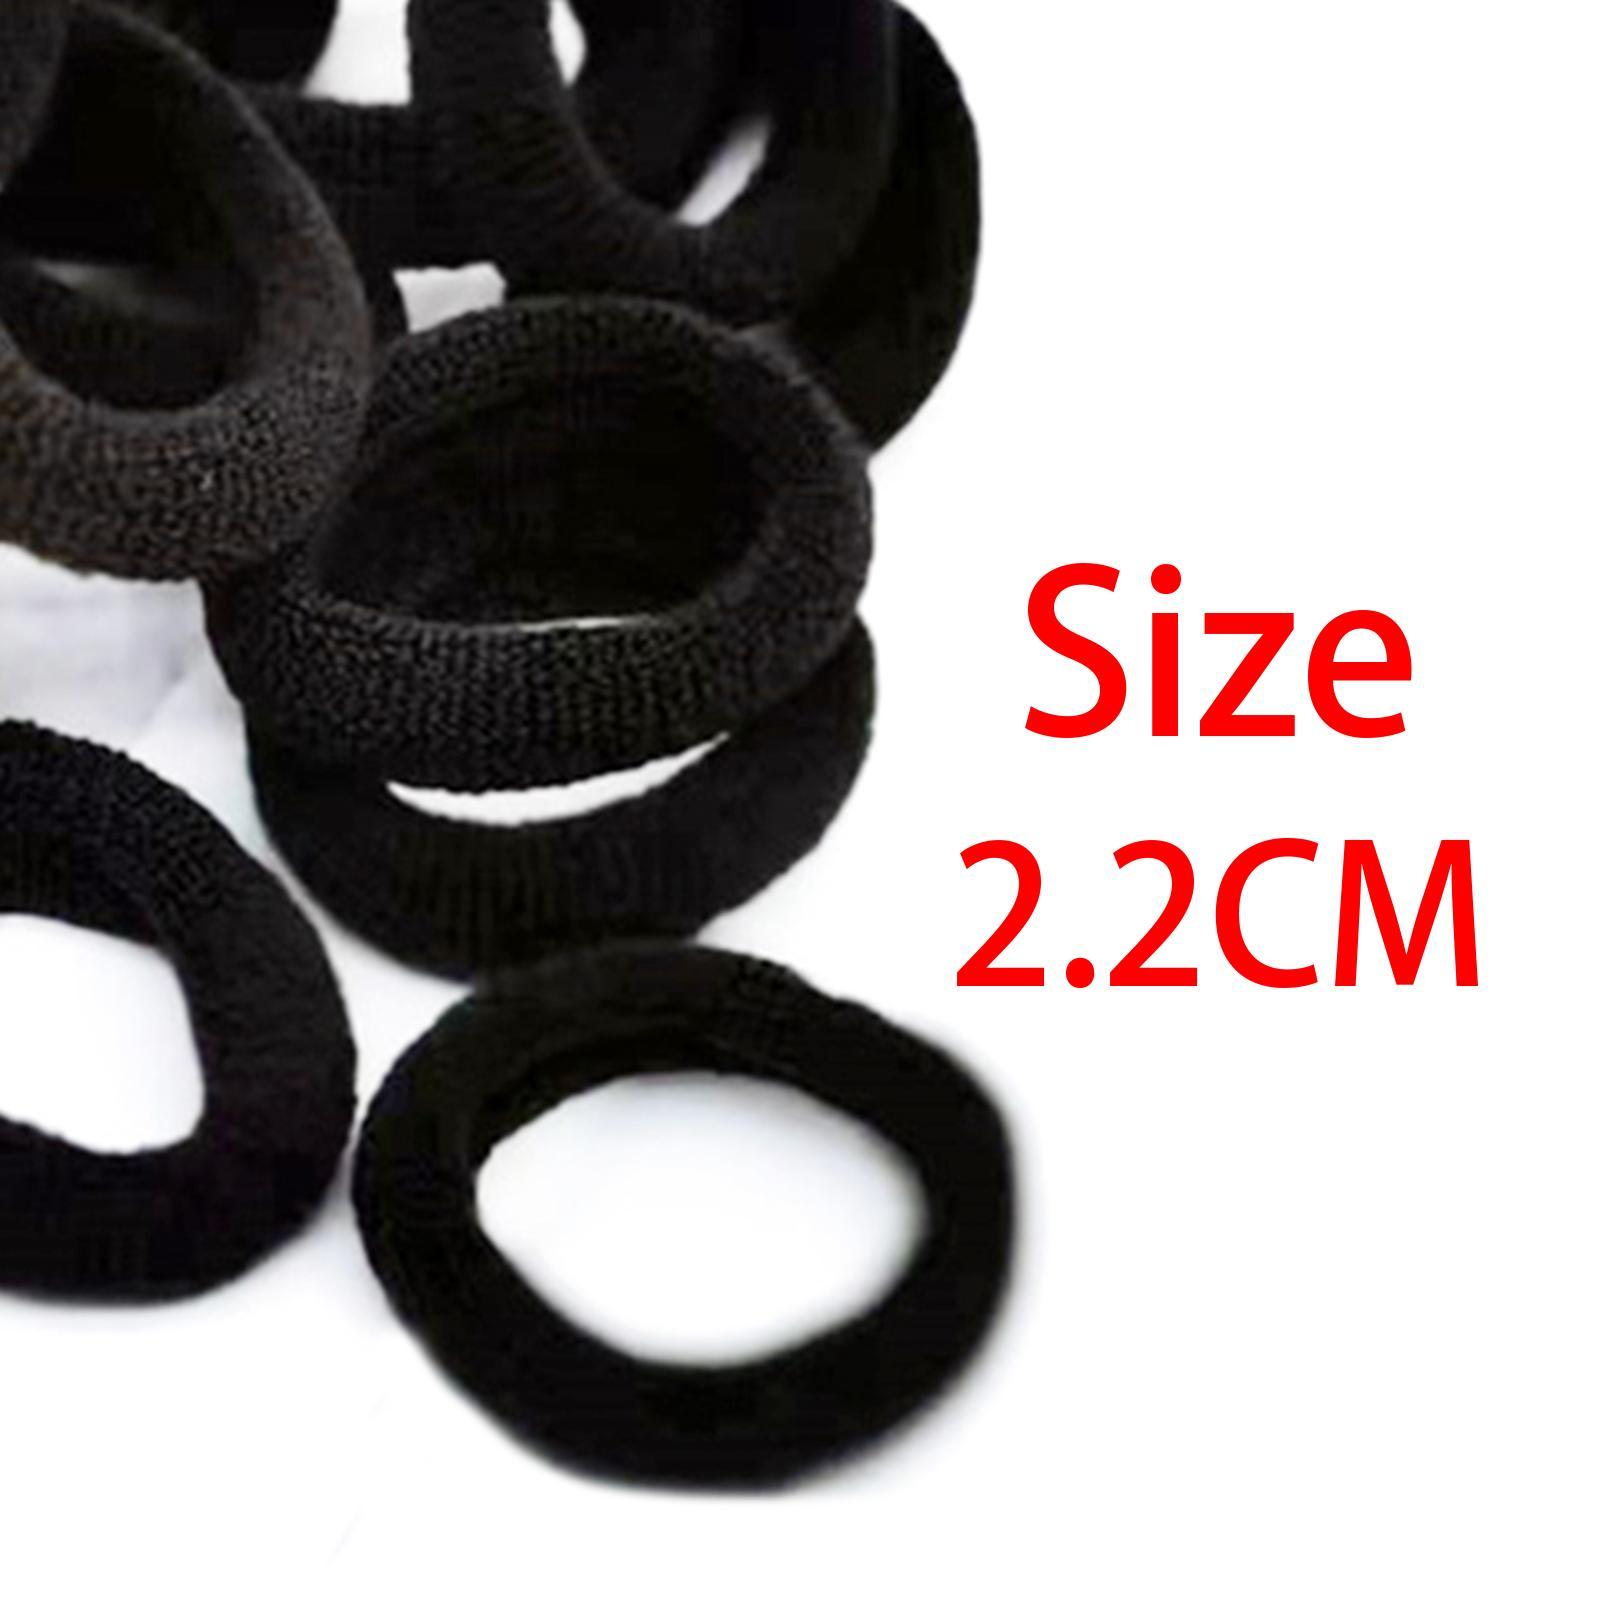 100 Pieces Black Hair Ties Hair Bands Thick Hair Accessories Small No Damage Soft Hair Ropes Stretch for Women Girls Elastic Cloth 0.9 inch